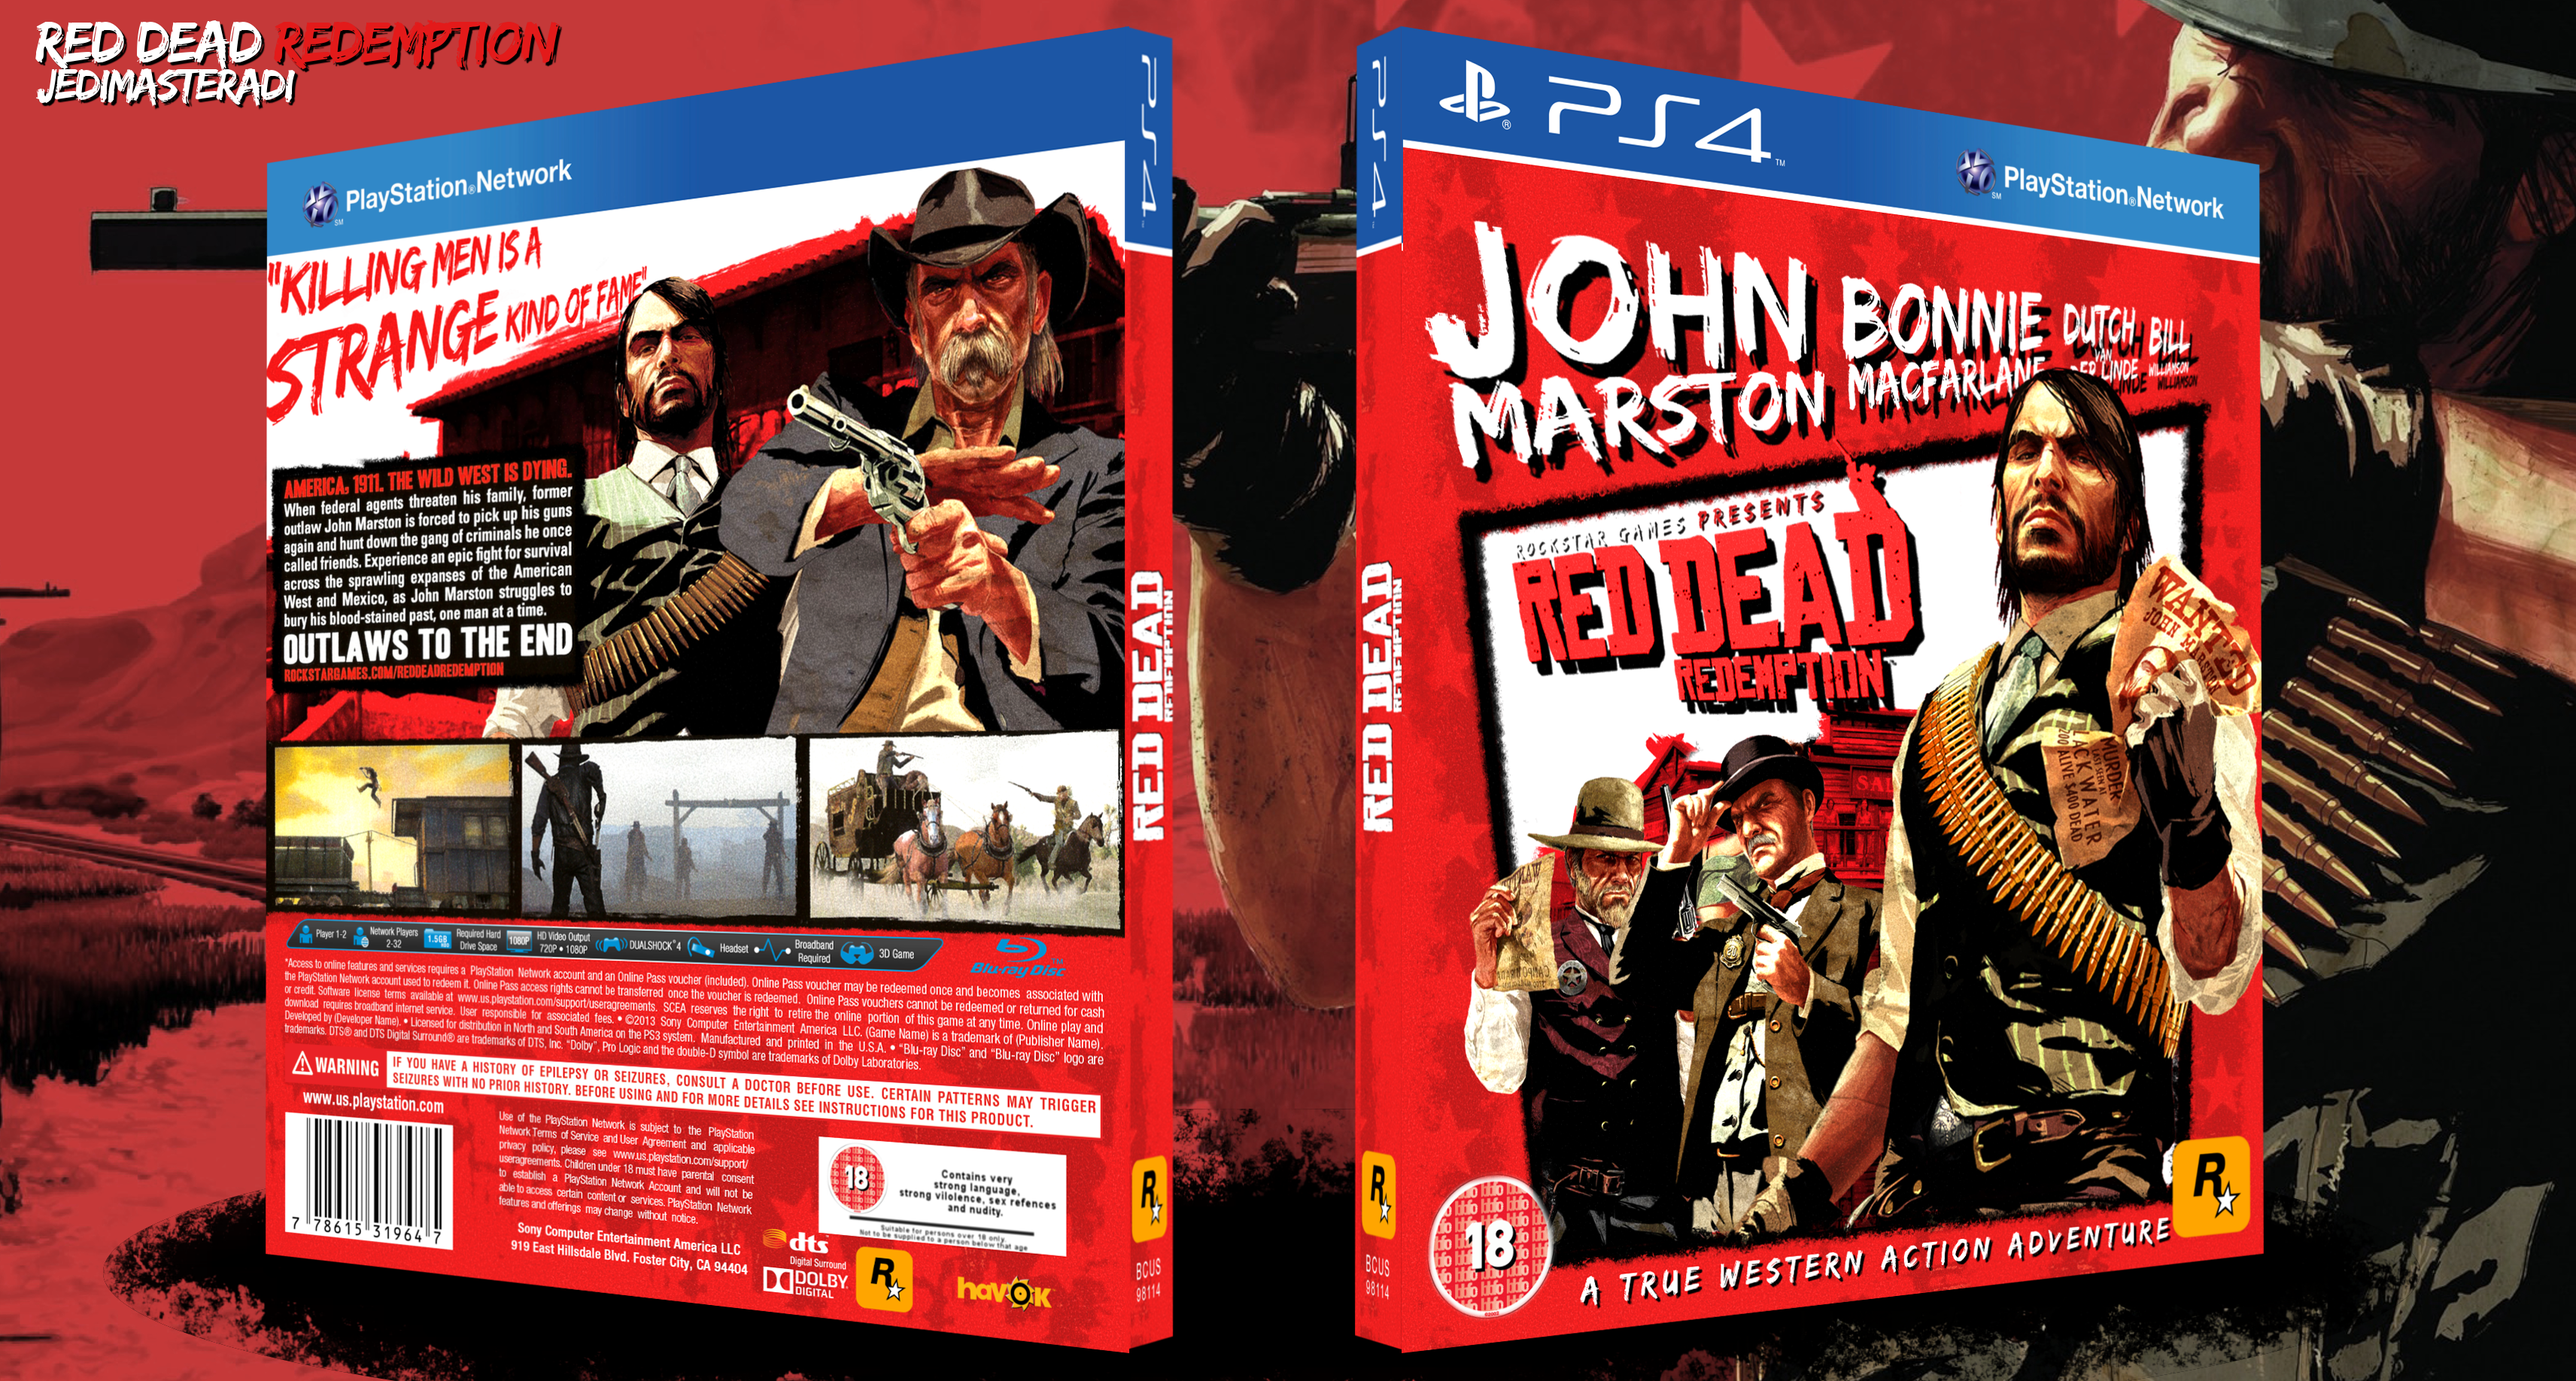 red dead redemption 2 cover button